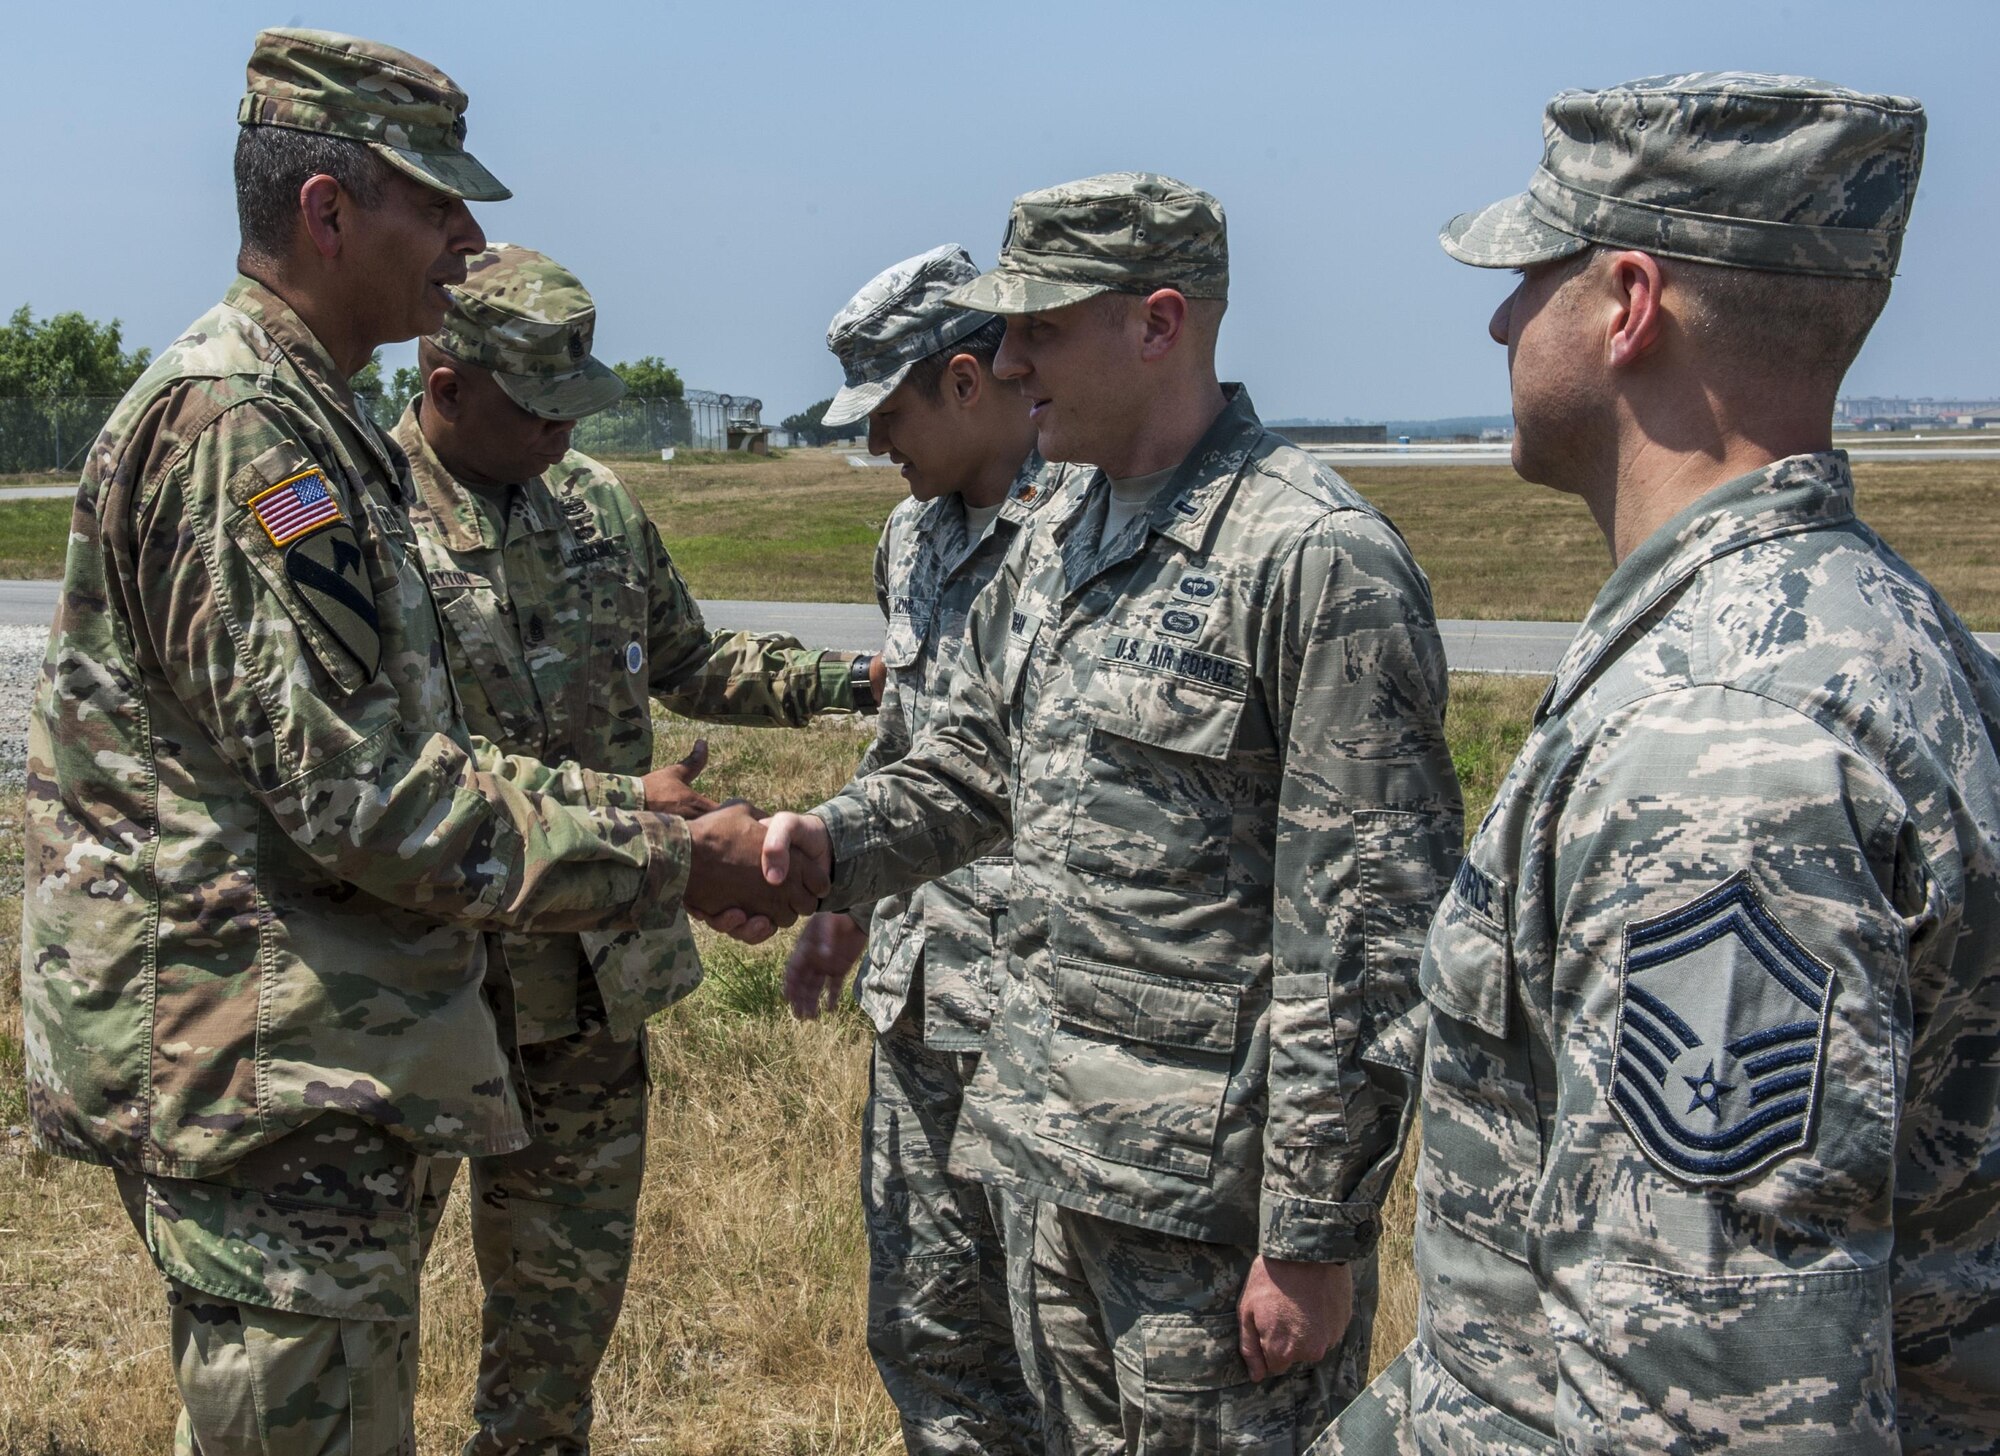 U.S. Army Gen. Vincent K. Brooks, United States Forces Korea commander, coins an Airman assigned to the 8th Operations Group, recognizing him as an outstanding performer at Kunsan Air Base, Republic of Korea, June 22, 2017. During his visit, Brooks recognized Airmen from multiple units for their hard work. (U.S. Air Force photo by Senior Airman Colville McFee/Released)